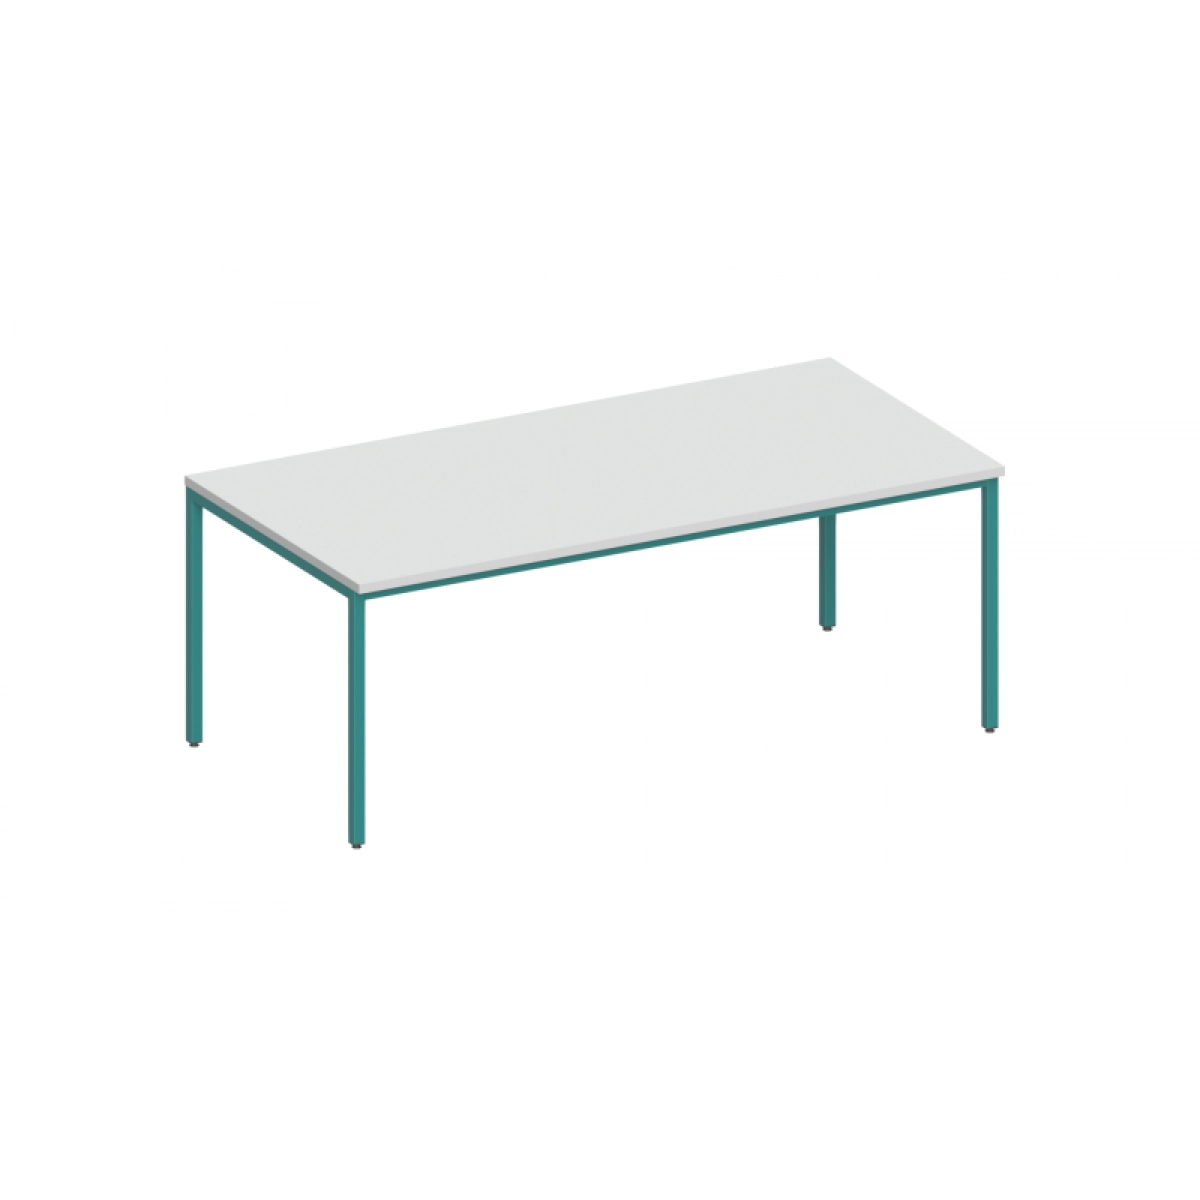 Width x depth:2000x1000 mm, Frame color:water blue, Height:720-900 mm